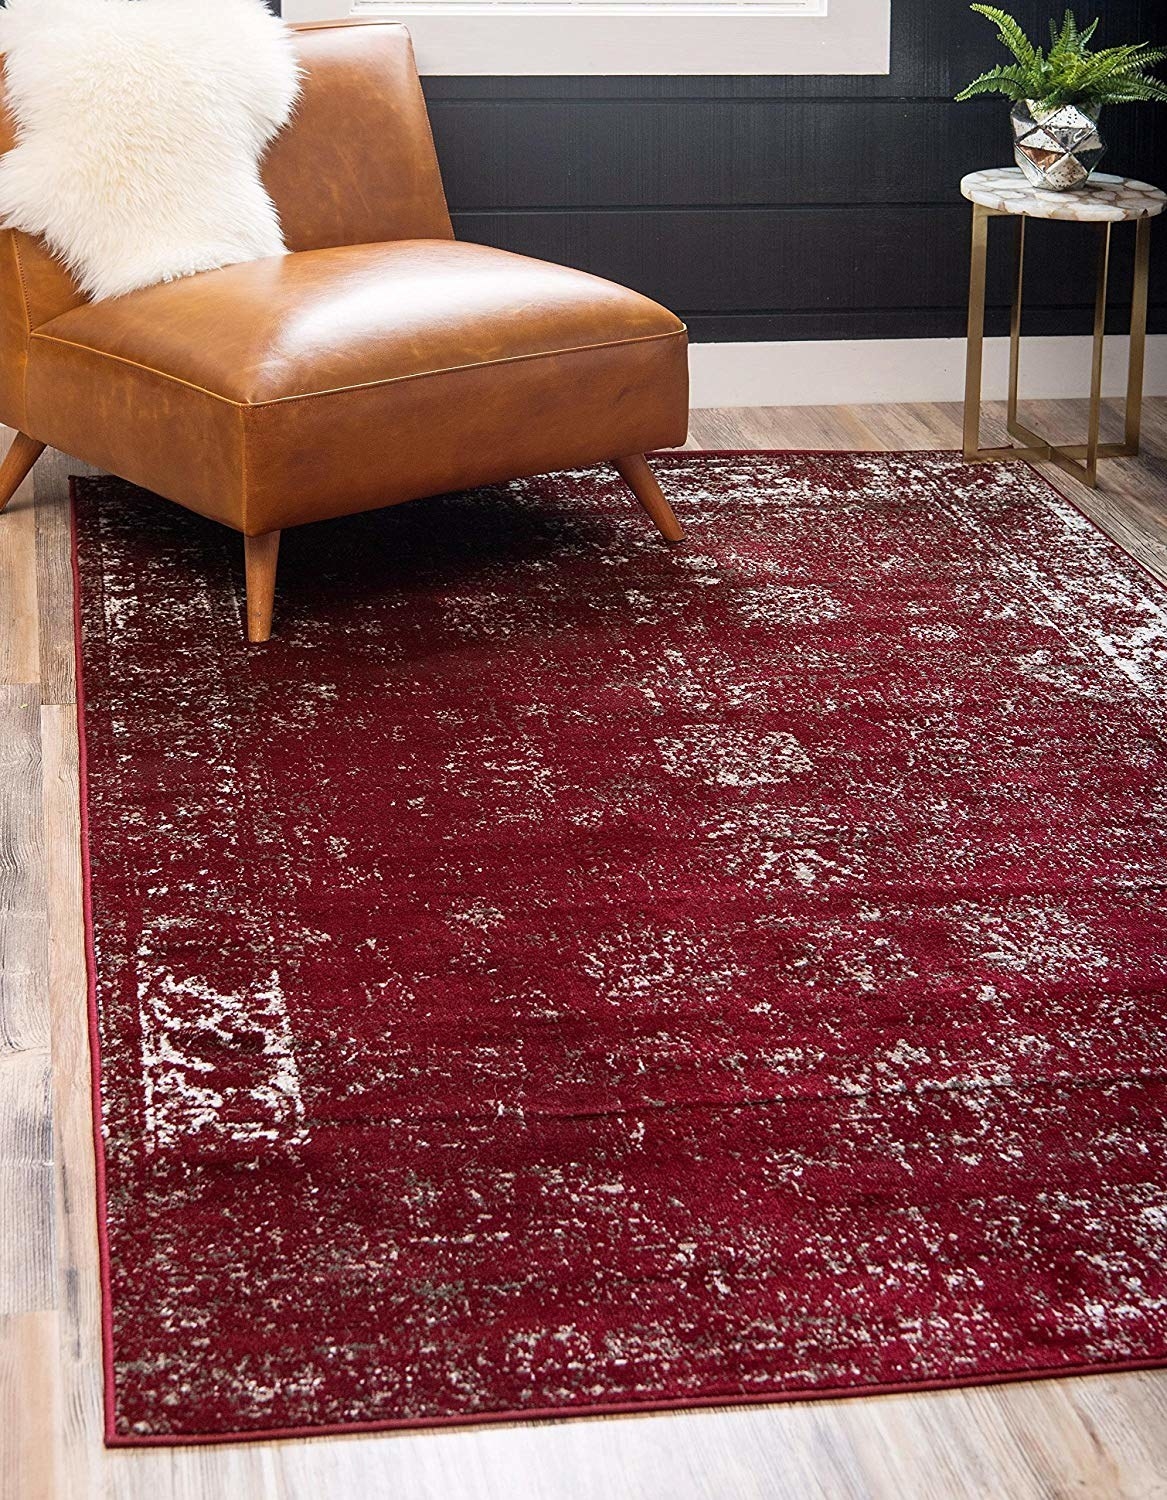 the dark red rug